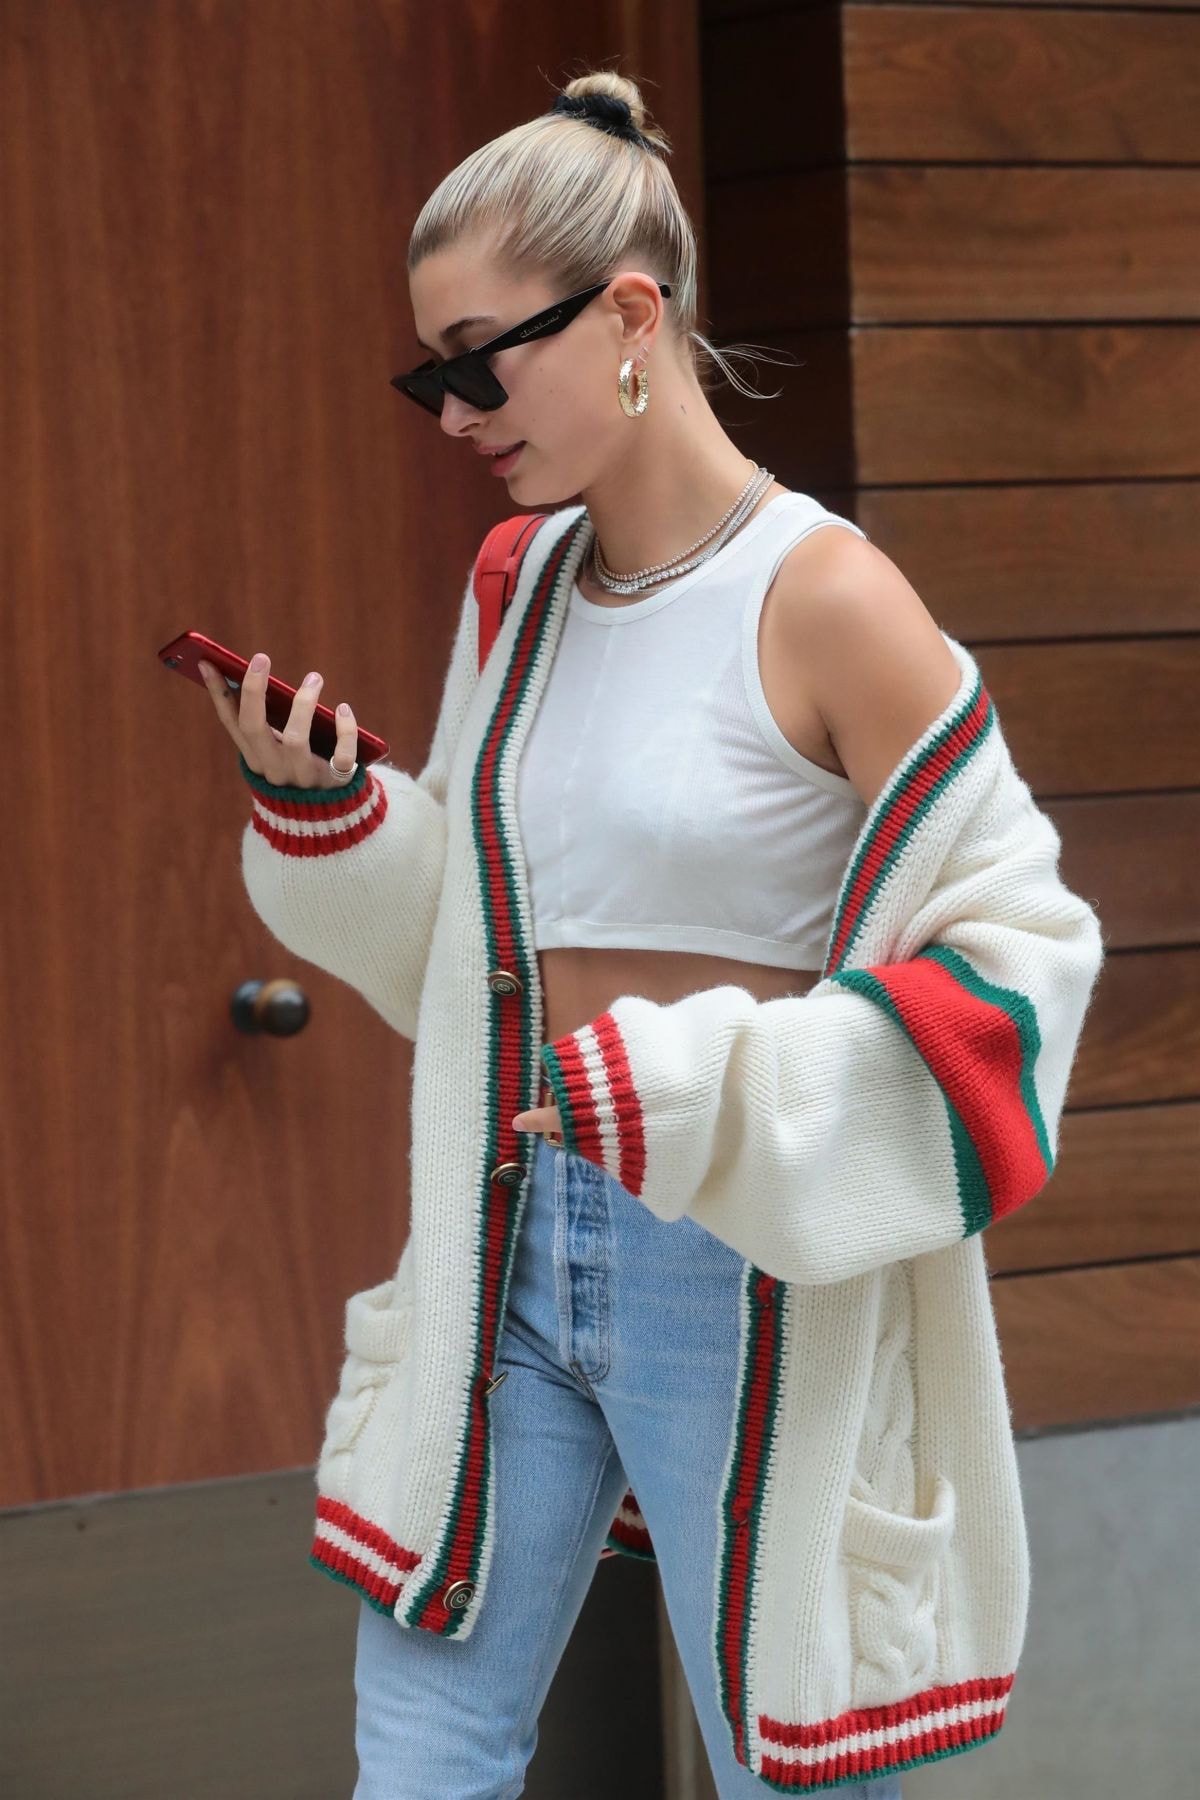 Hailey Baldwin Gucci Cardigan White Red Green Cable Knit Crop Top Supreme Louis Vuitton Bag Celine Sunglasses Hoop Earrings Gold